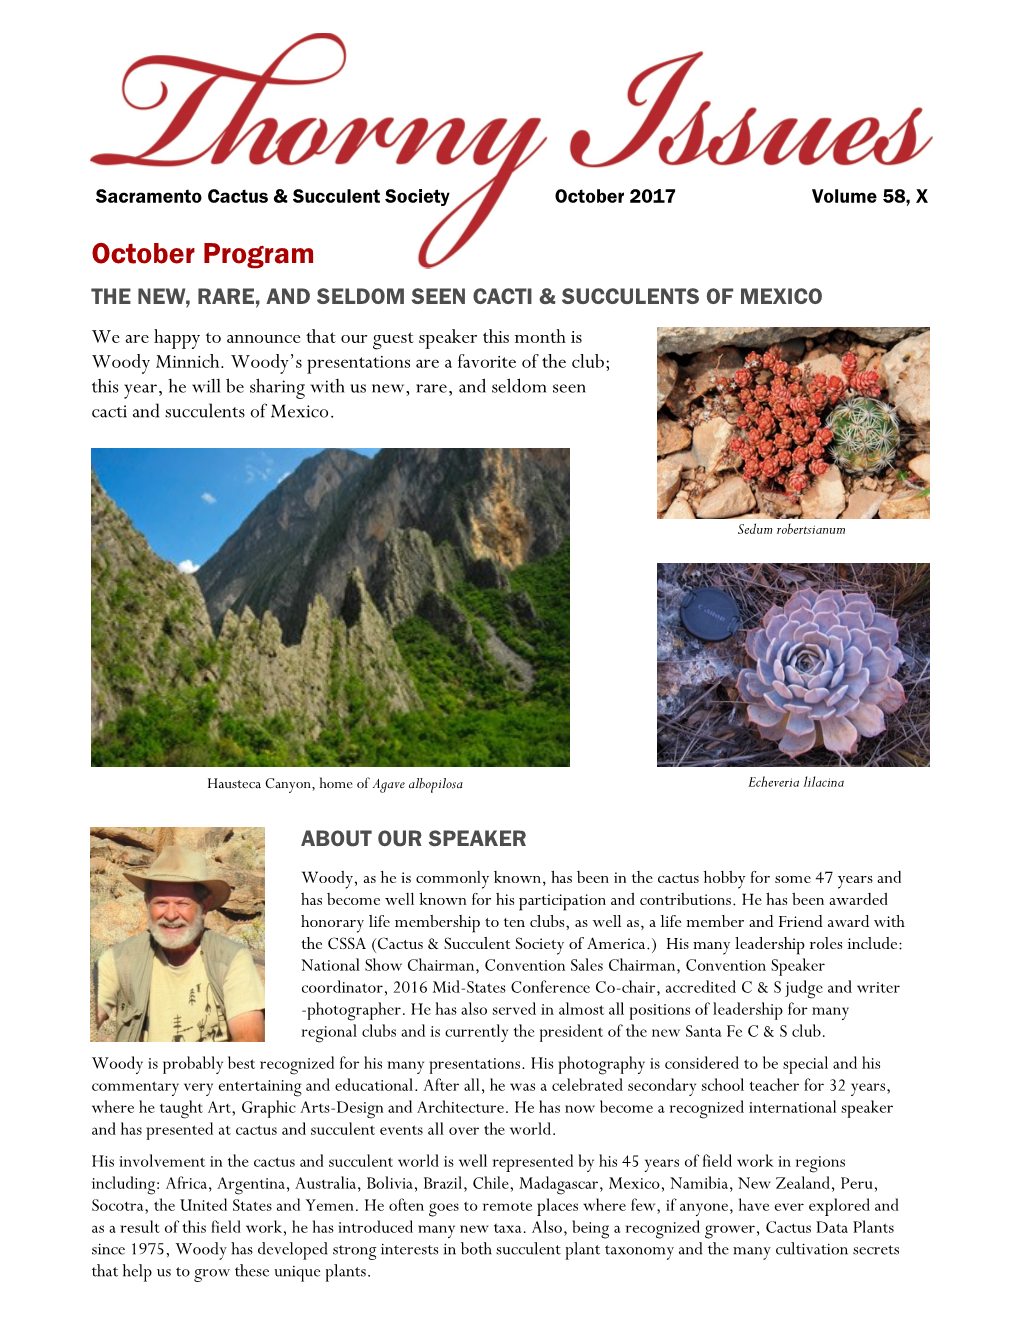 October Program the NEW, RARE, and SELDOM SEEN CACTI & SUCCULENTS of MEXICO We Are Happy to Announce That Our Guest Speaker This Month Is Woody Minnich